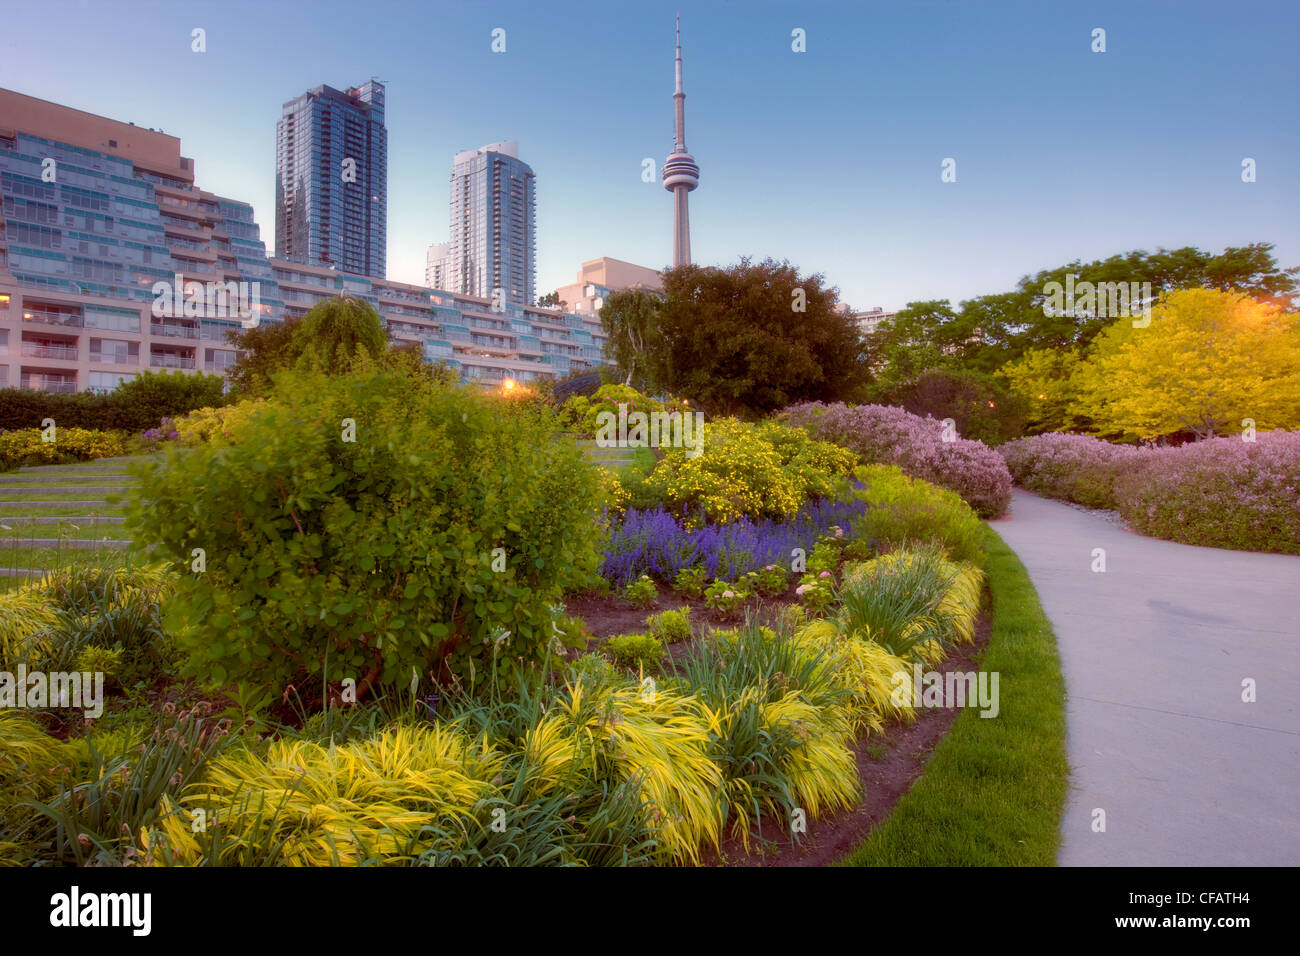 Toronto Music Garden Along The Waterfront With Cn Tower In The